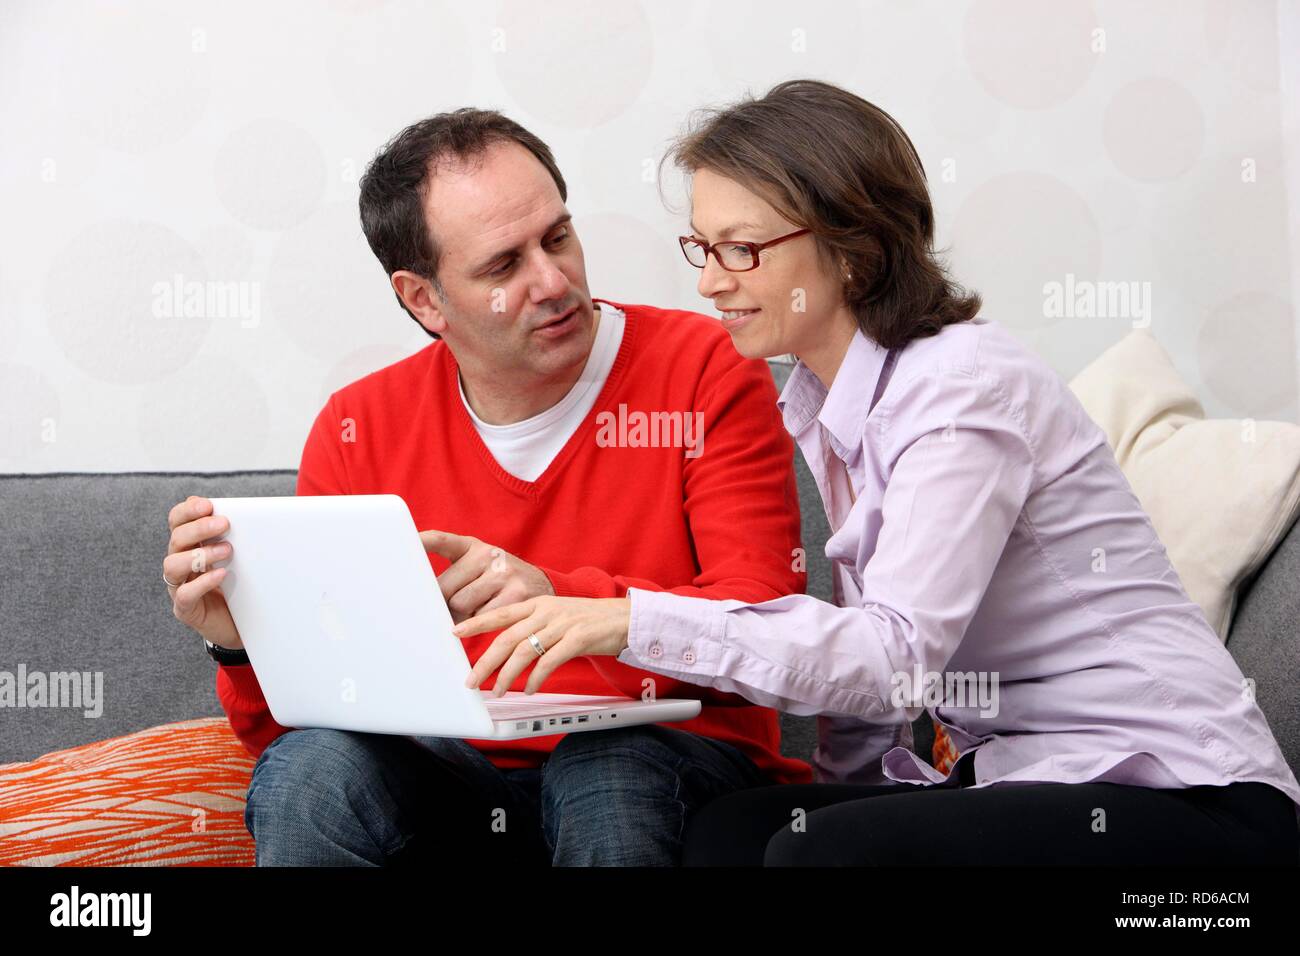 Couple, man, woman, about 45 years old, surfing the Internet on a laptop at home Stock Photo